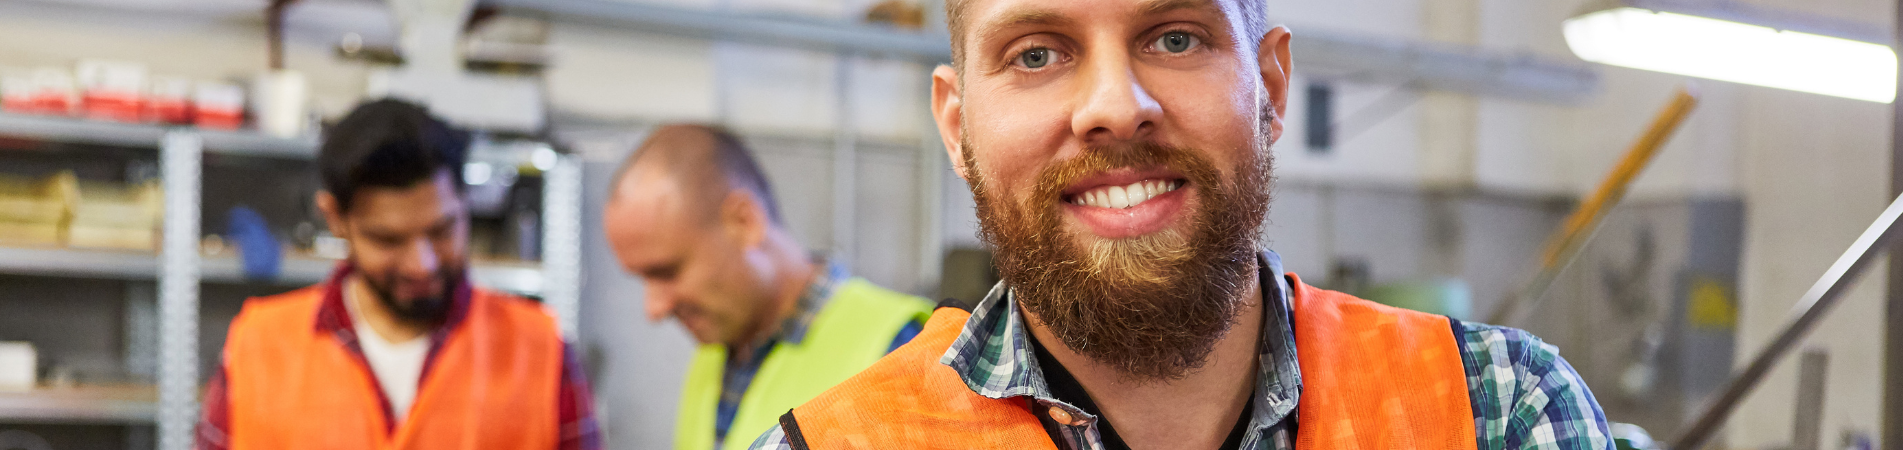 Man wearing high-vis smiling with two colleagues in background